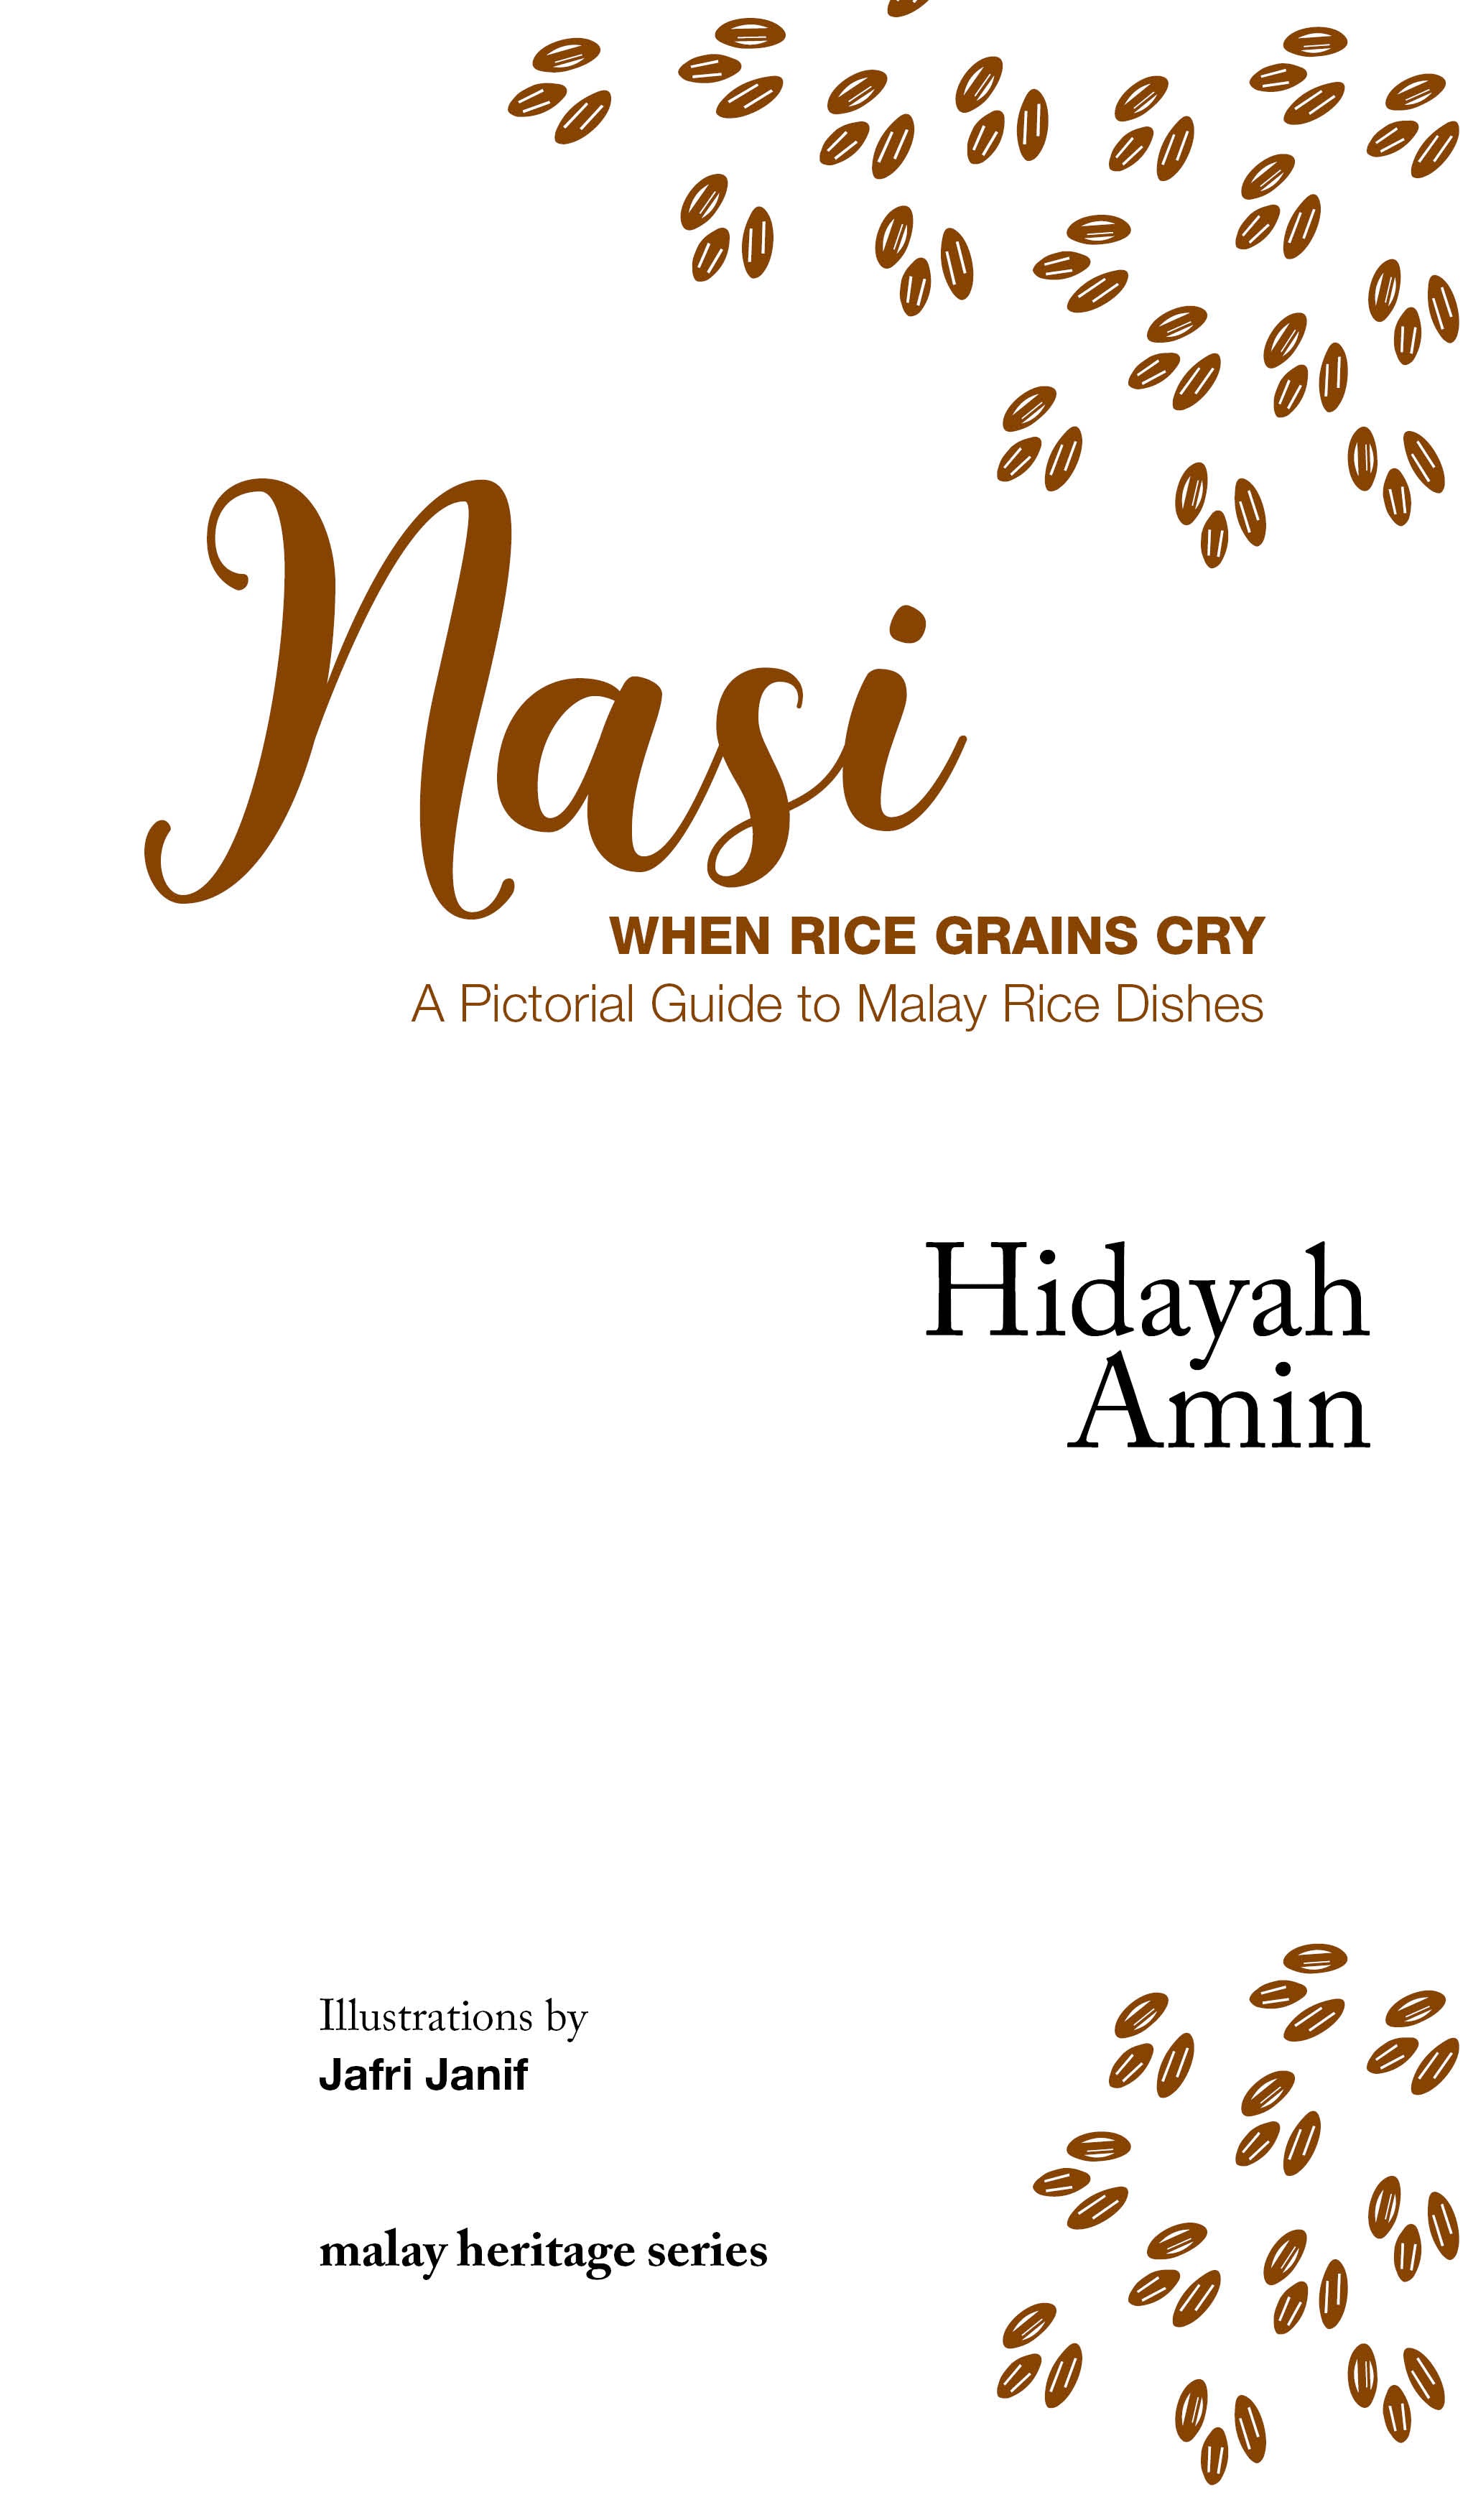 Nasi: When Rice Grains Cry, A Pictorial Guide to Malay Rice Dishes